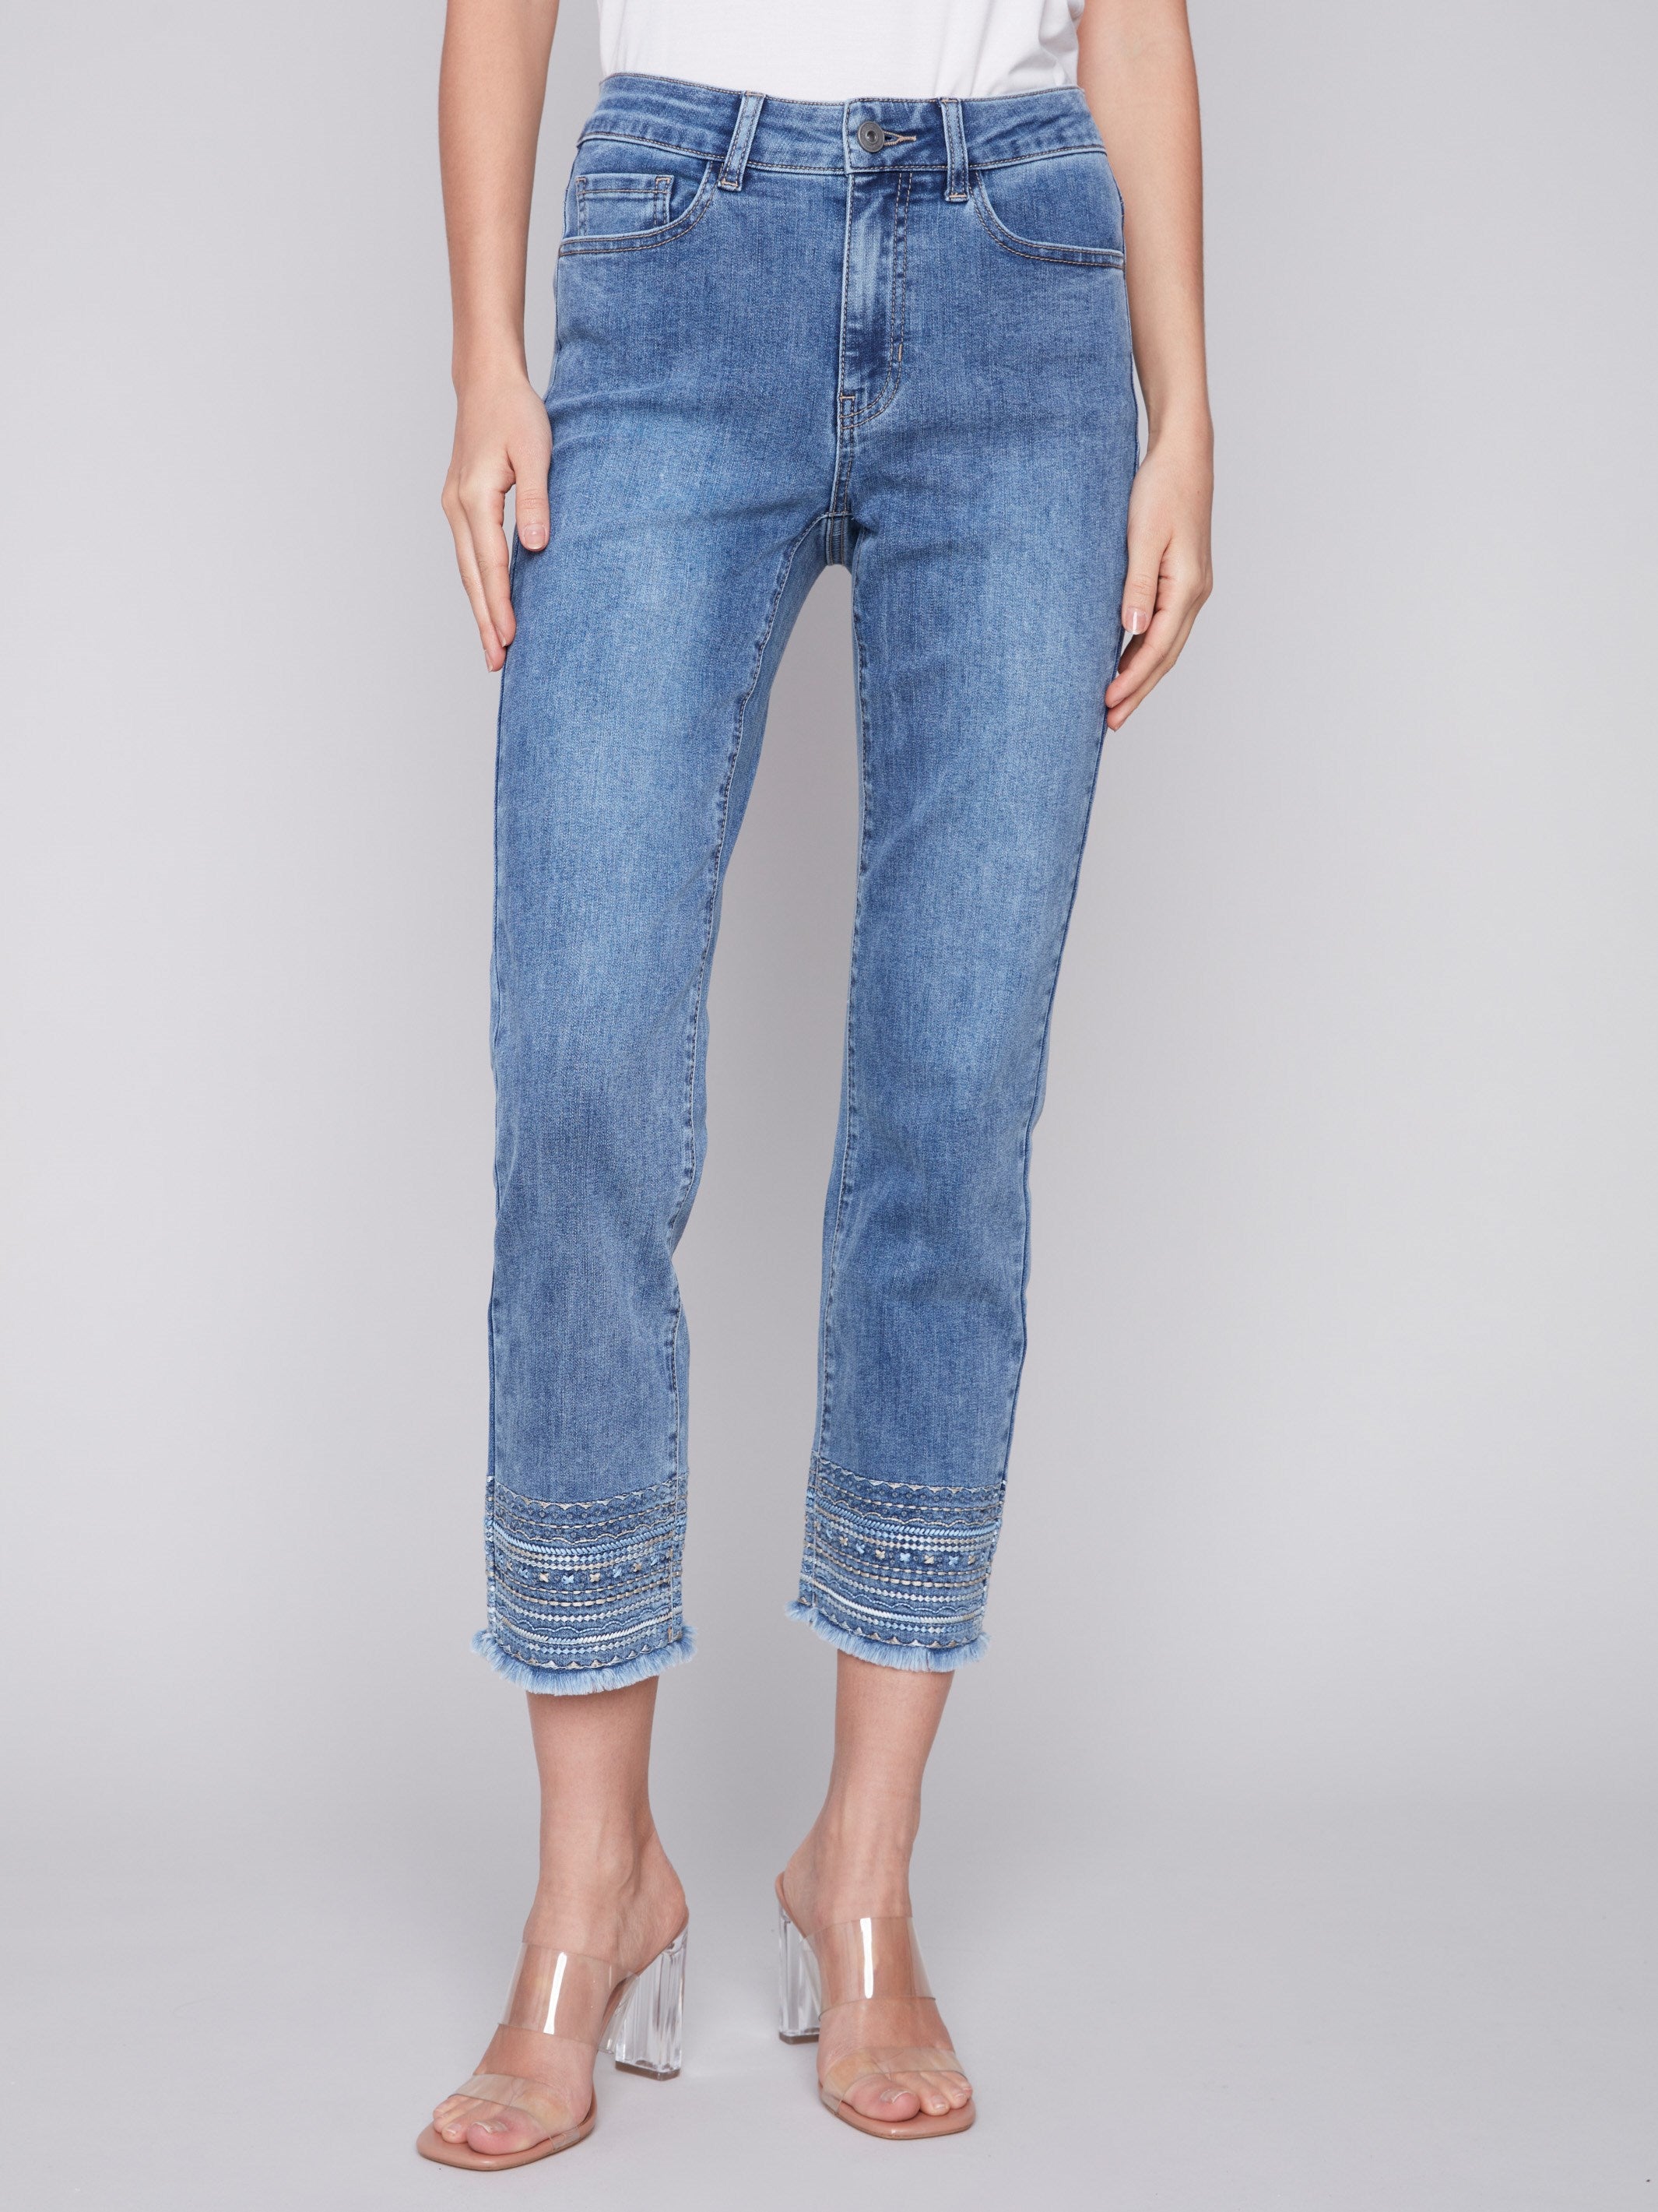 Embroidered Hem Jeans - Medium Blue - Charlie B Collection Canada - Image 2